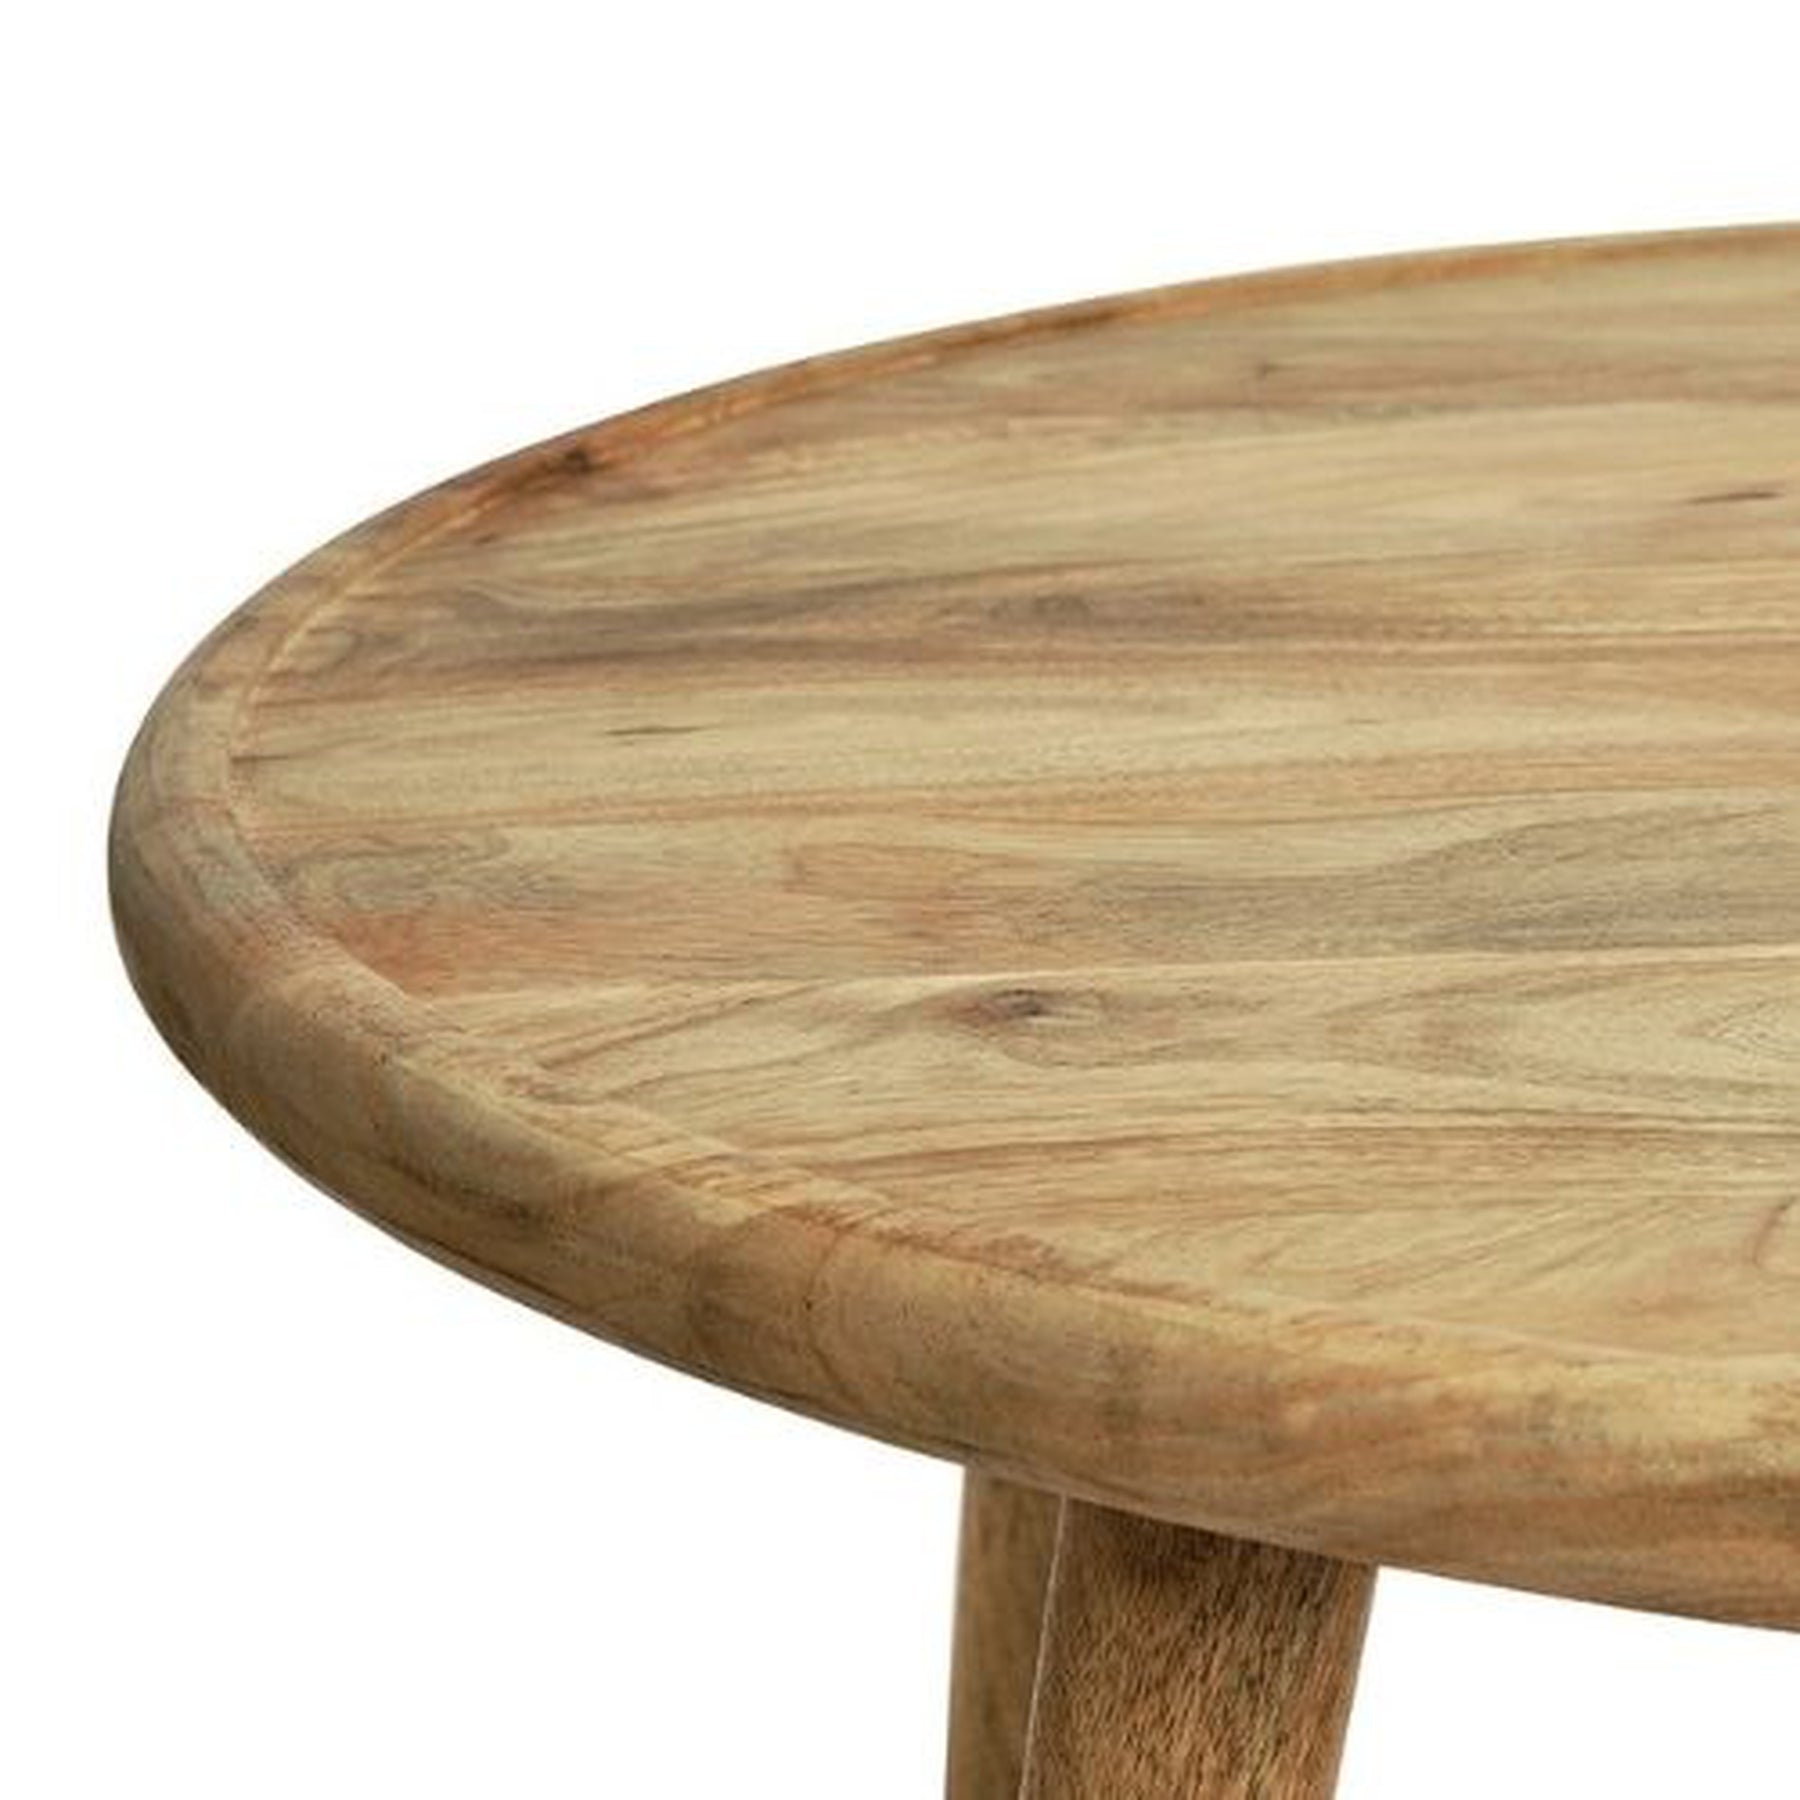 Retro Round Small Solid Wood Side Table | 16x16x20 inches